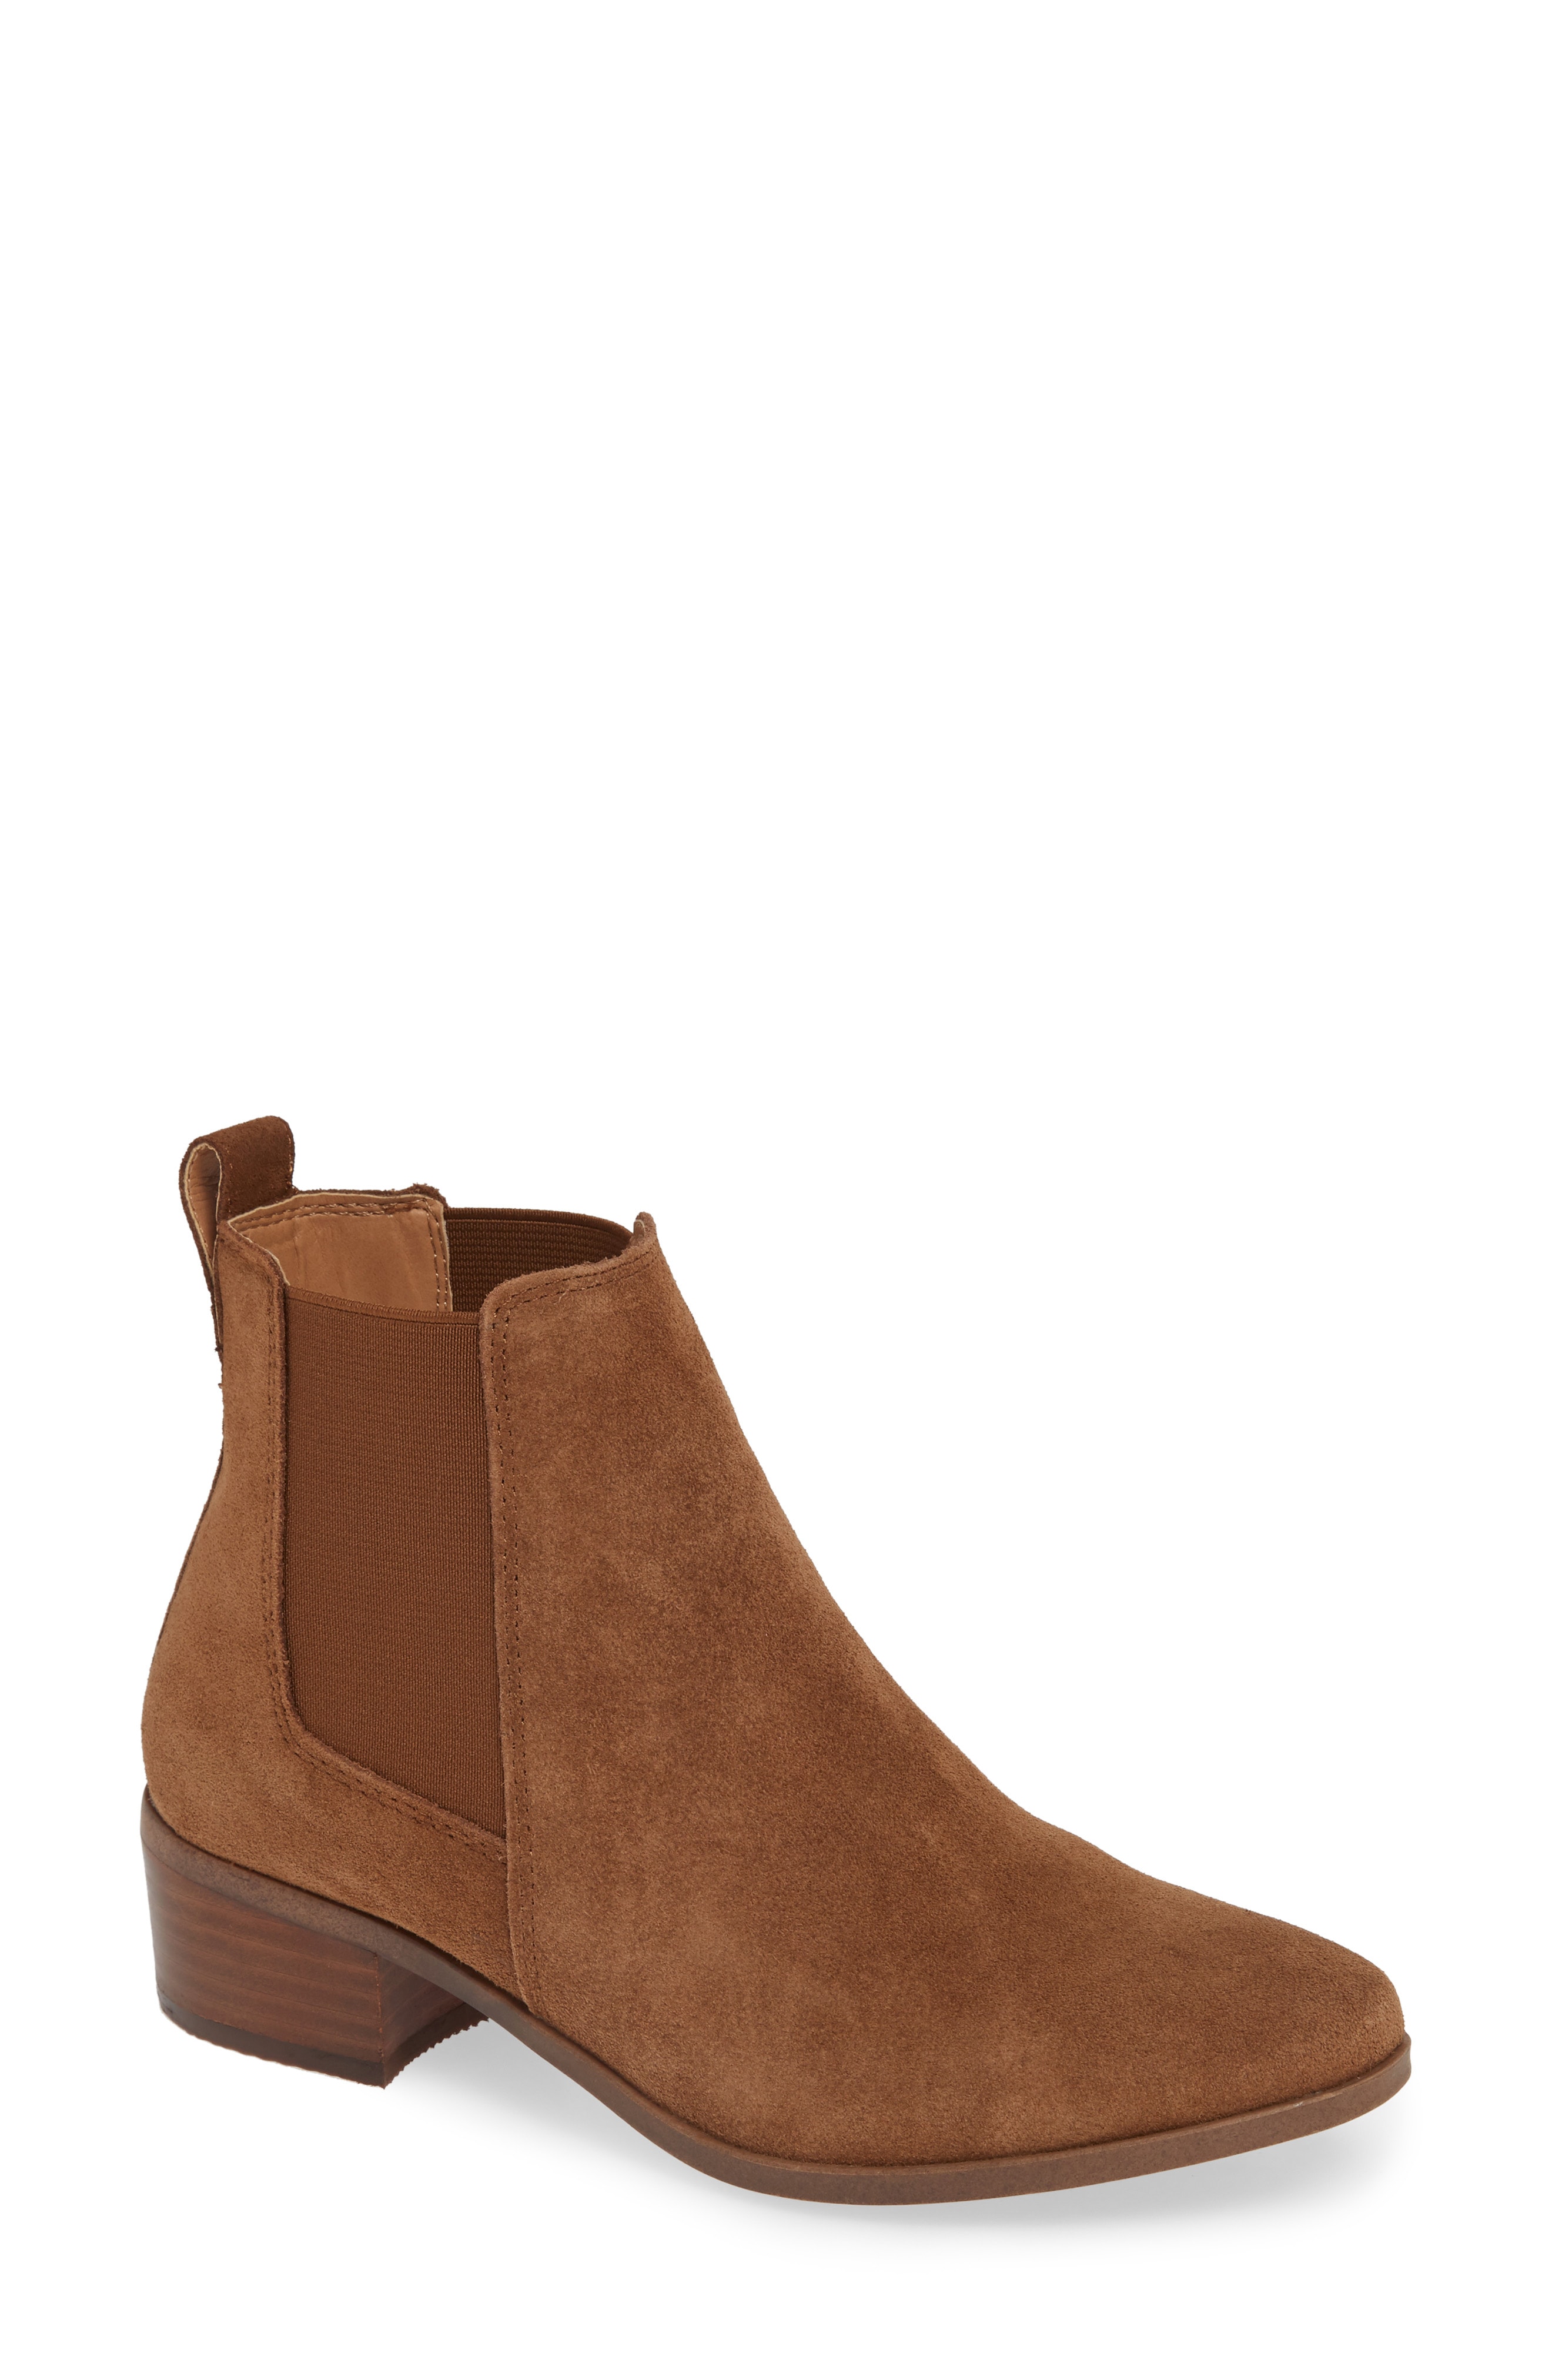 suede boots | Nordstrom